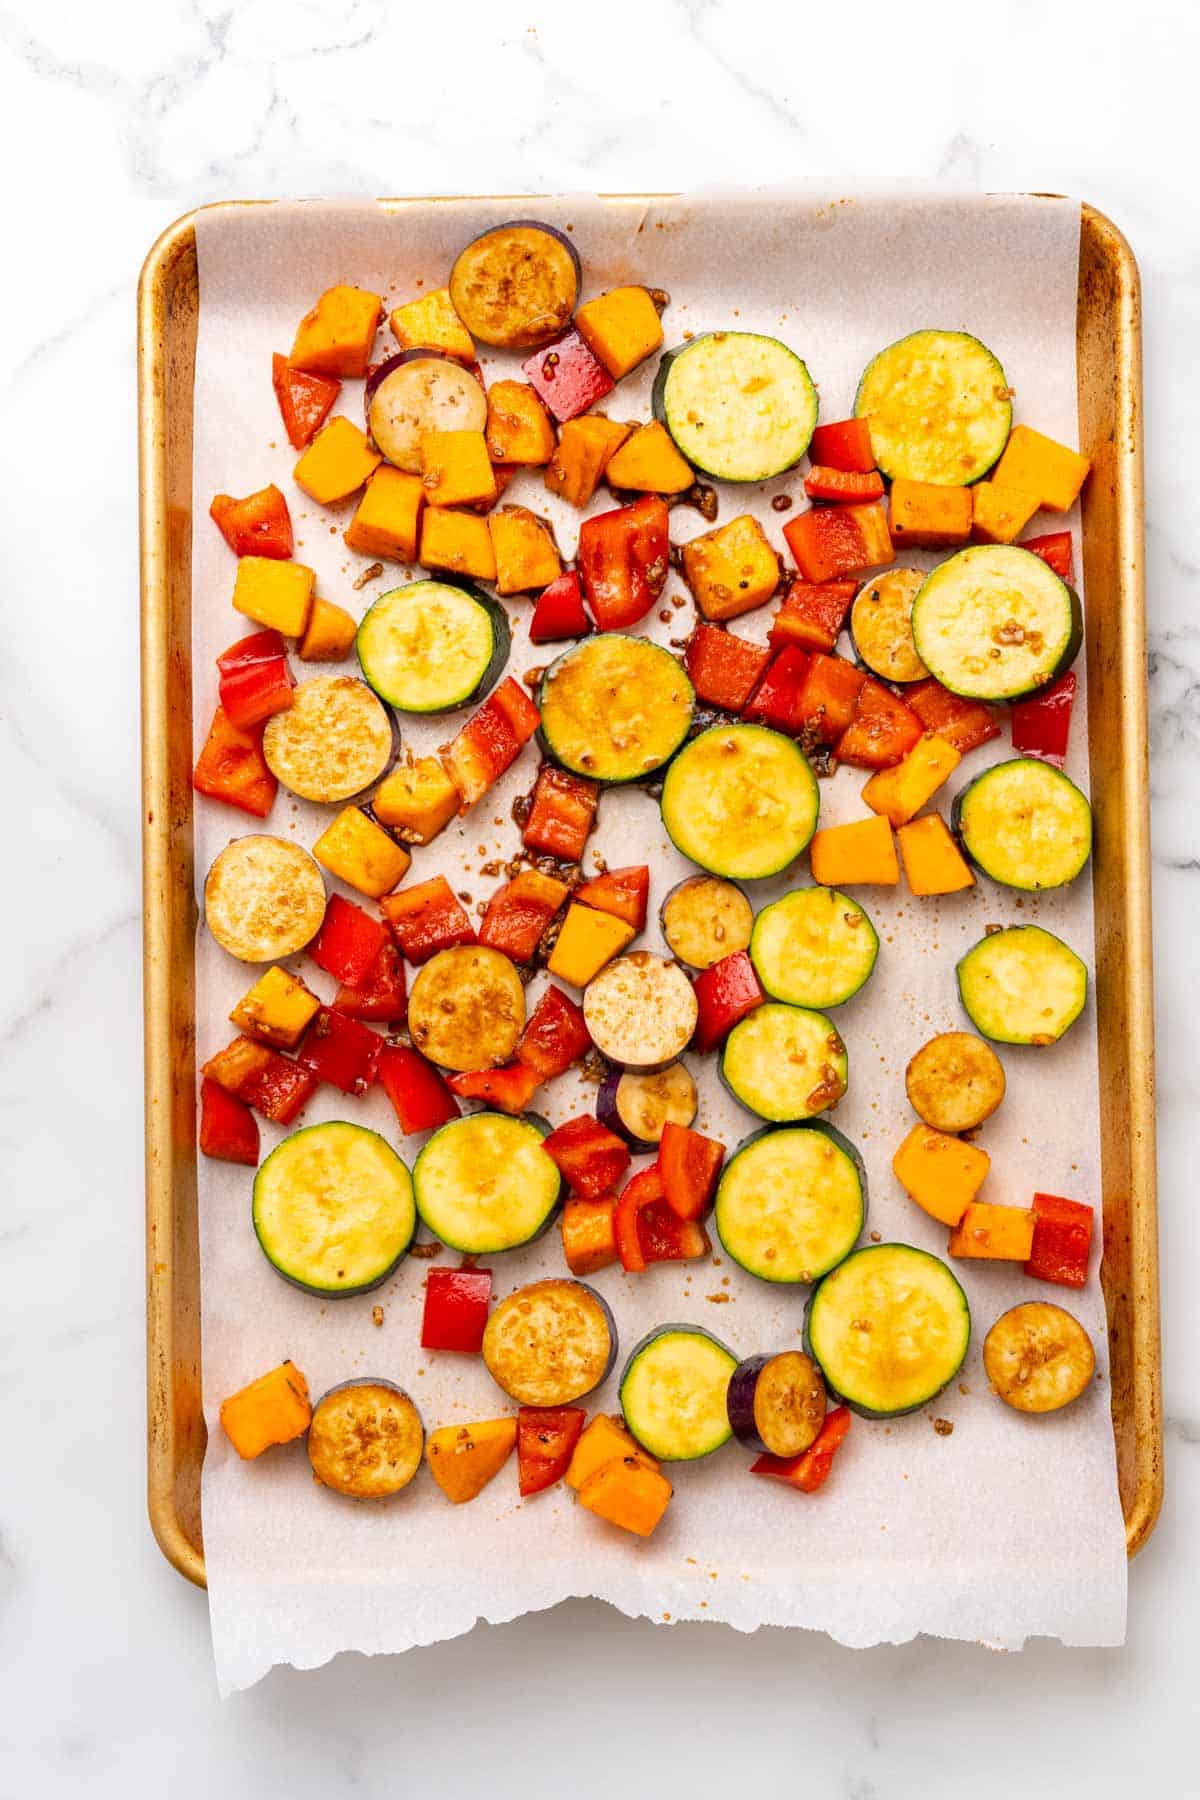 Glazed veggies on a baking tray lined with parchment paper, as seen from above on a white marble countertop